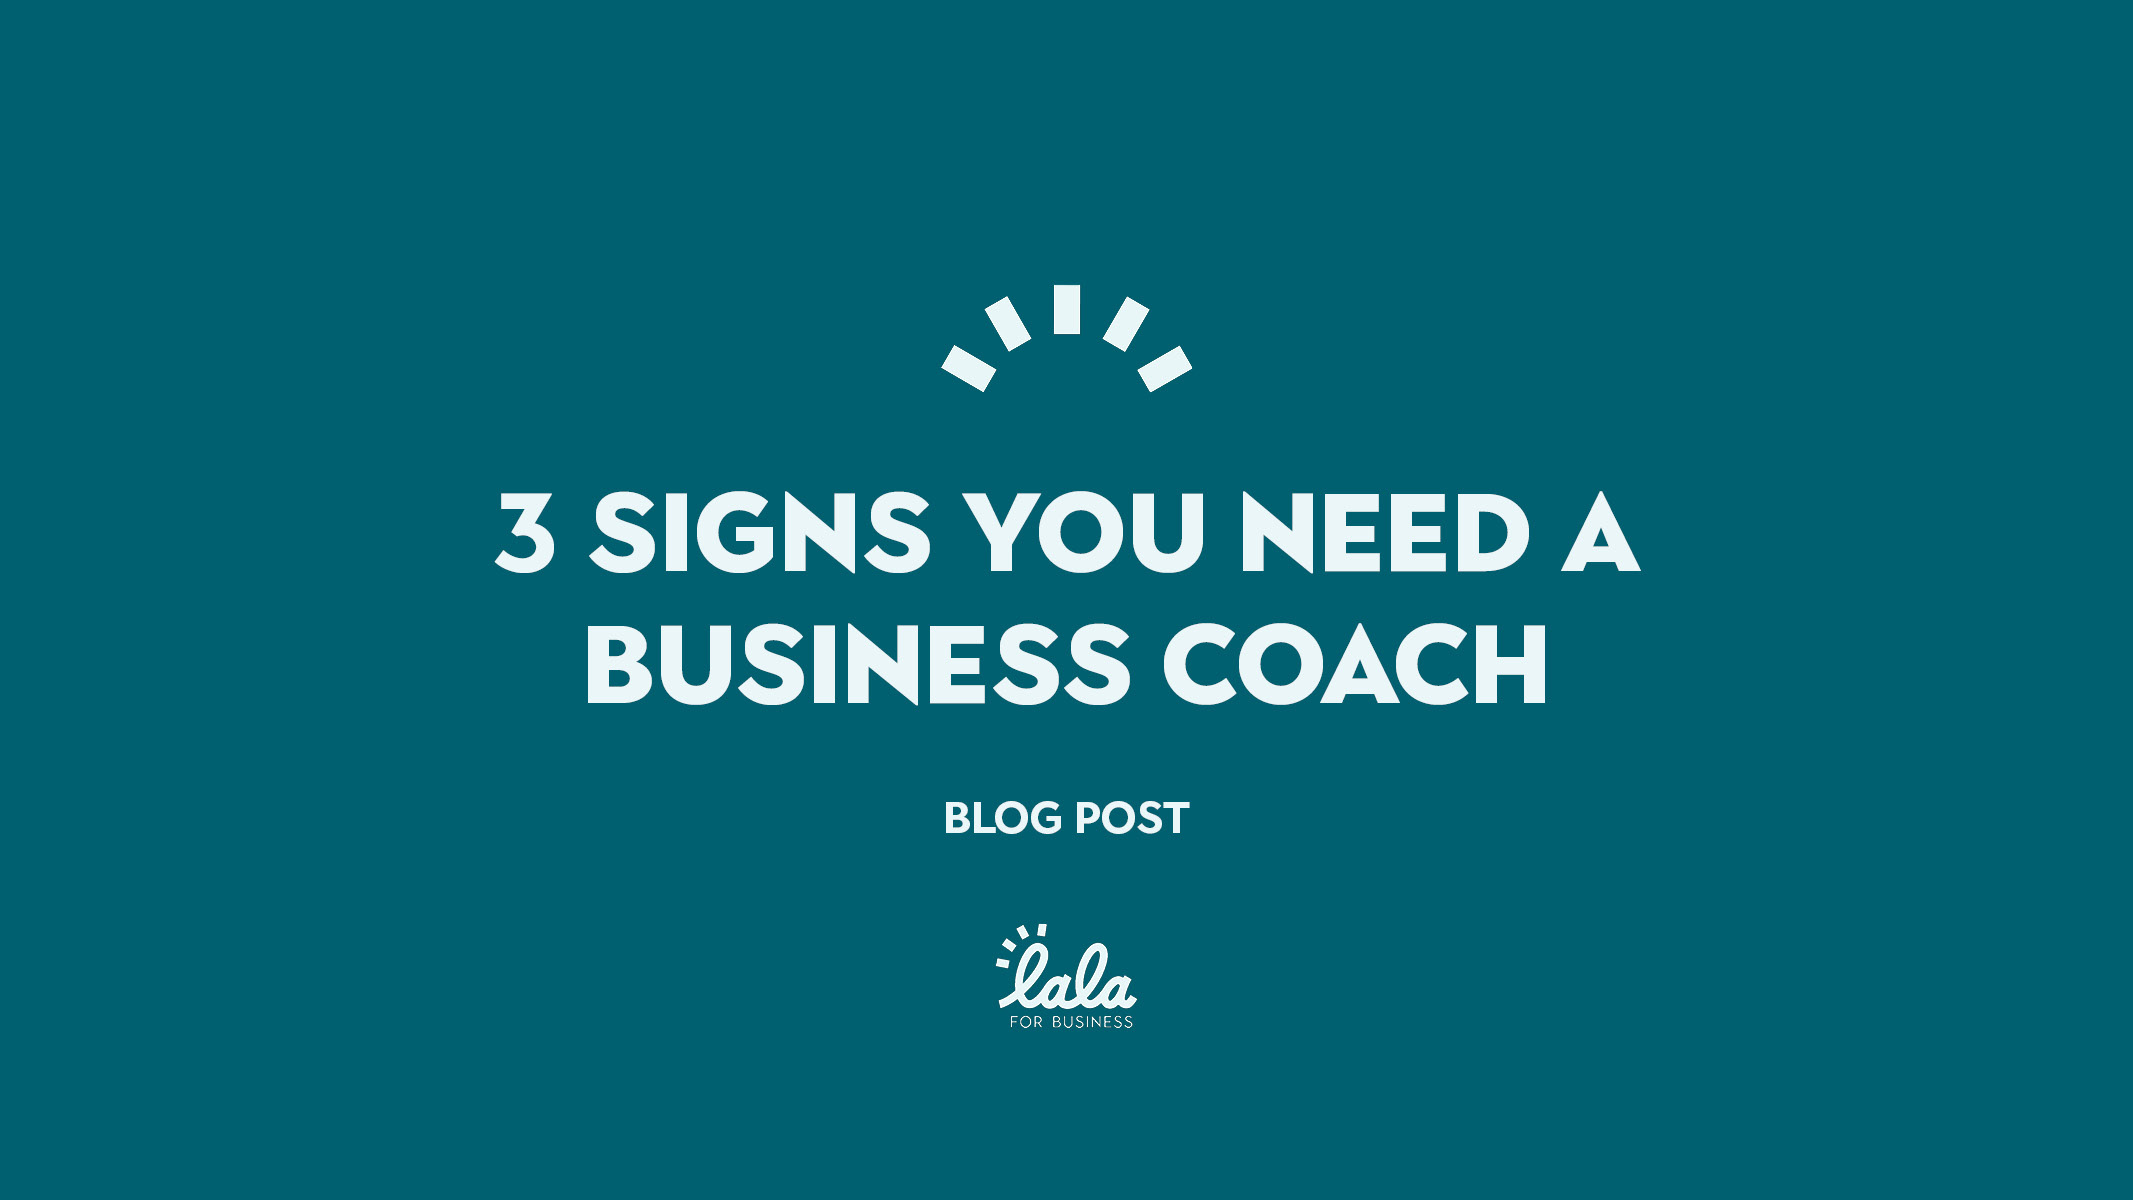 3 Signs You Need a Business Coach